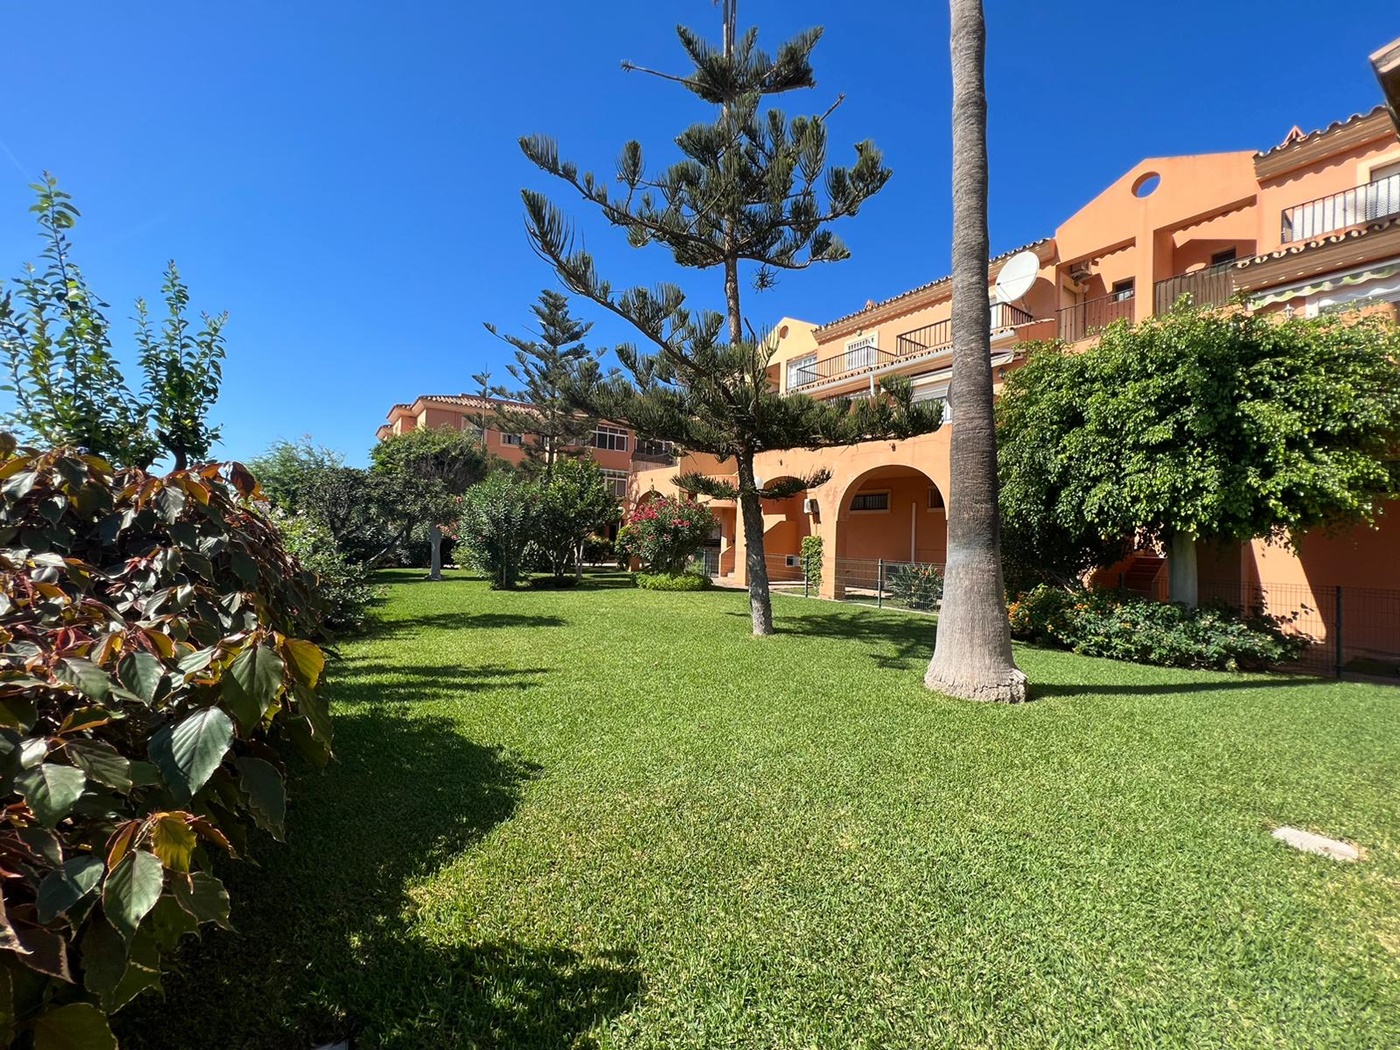 Fantastic Duplex located just 200 meters from the beach